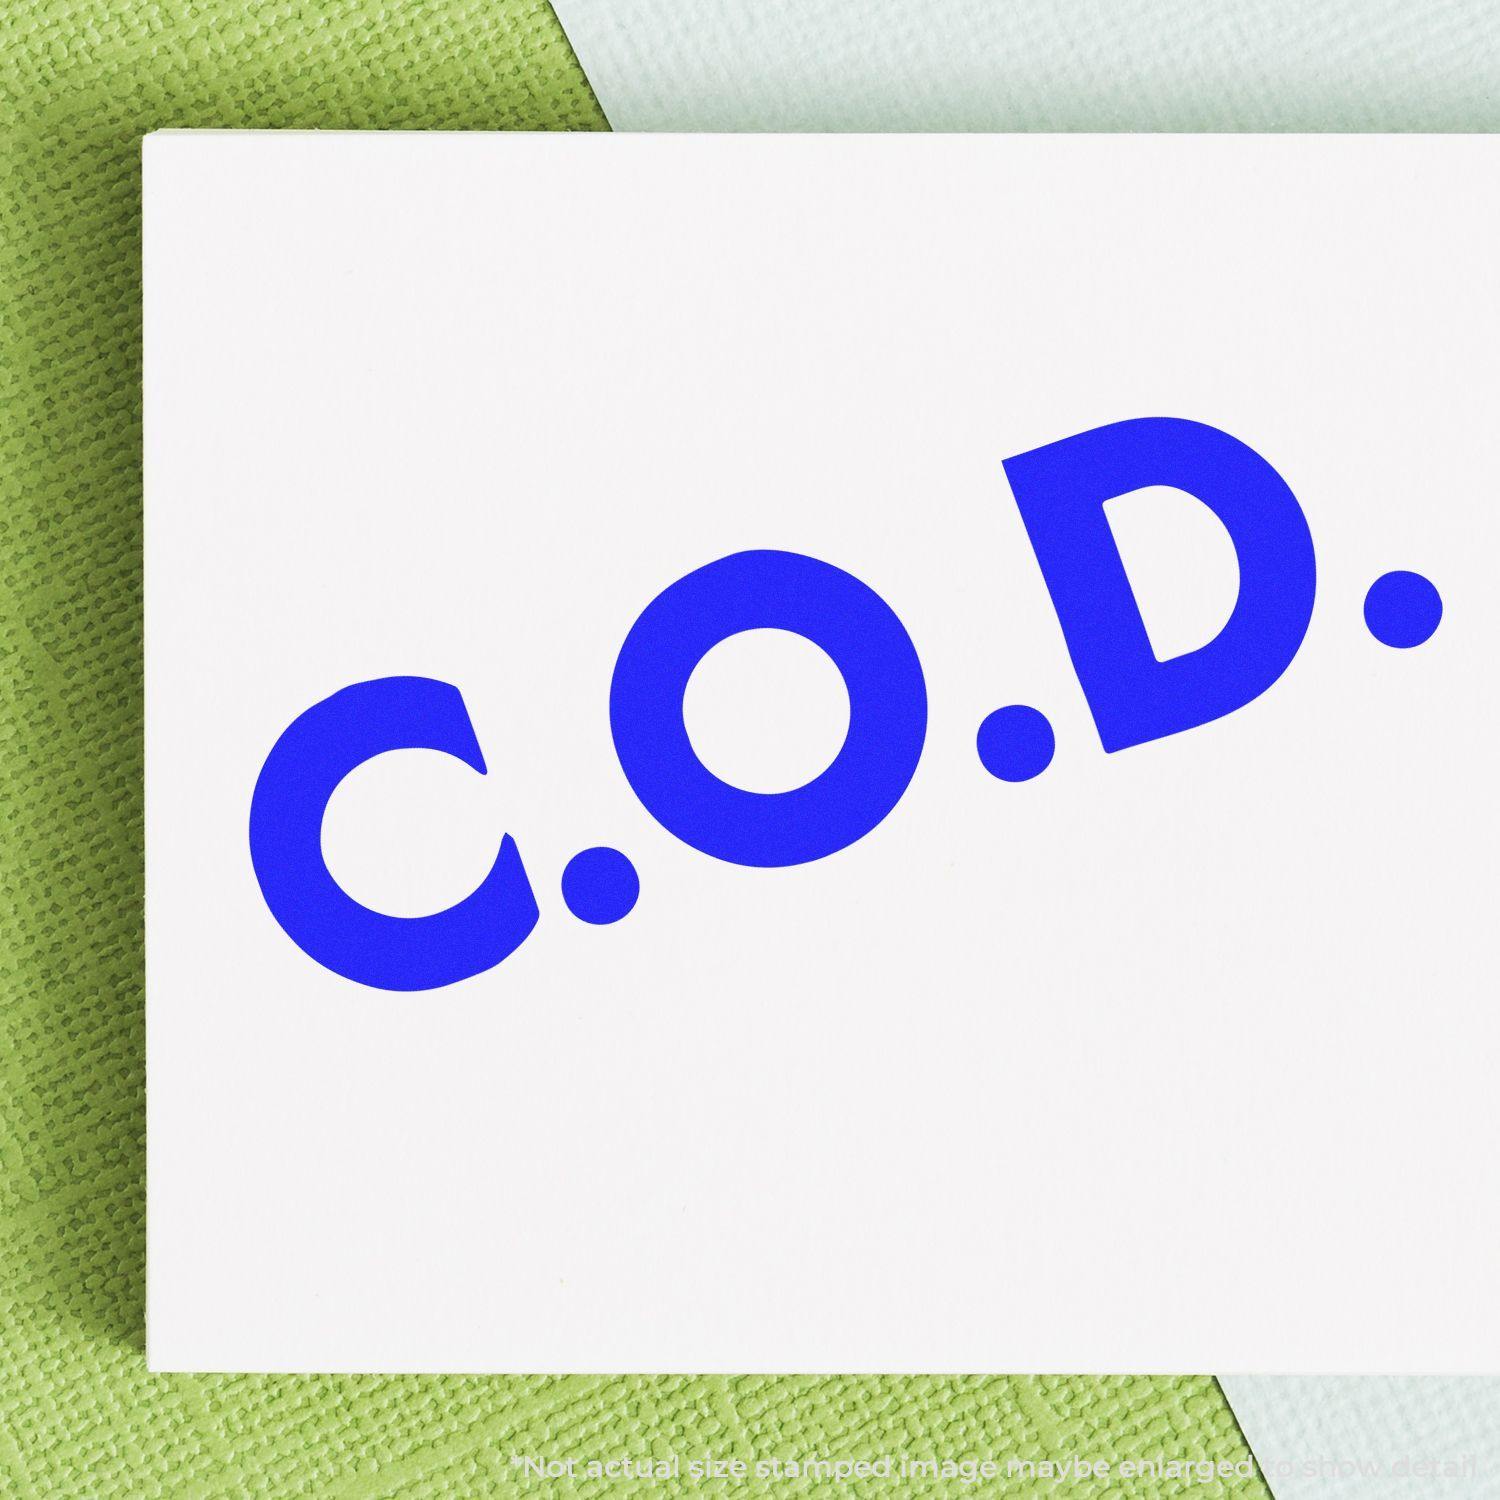 A self-inking stamp with a stamped image showing how the text "C.O.D." in bold font is displayed after stamping.